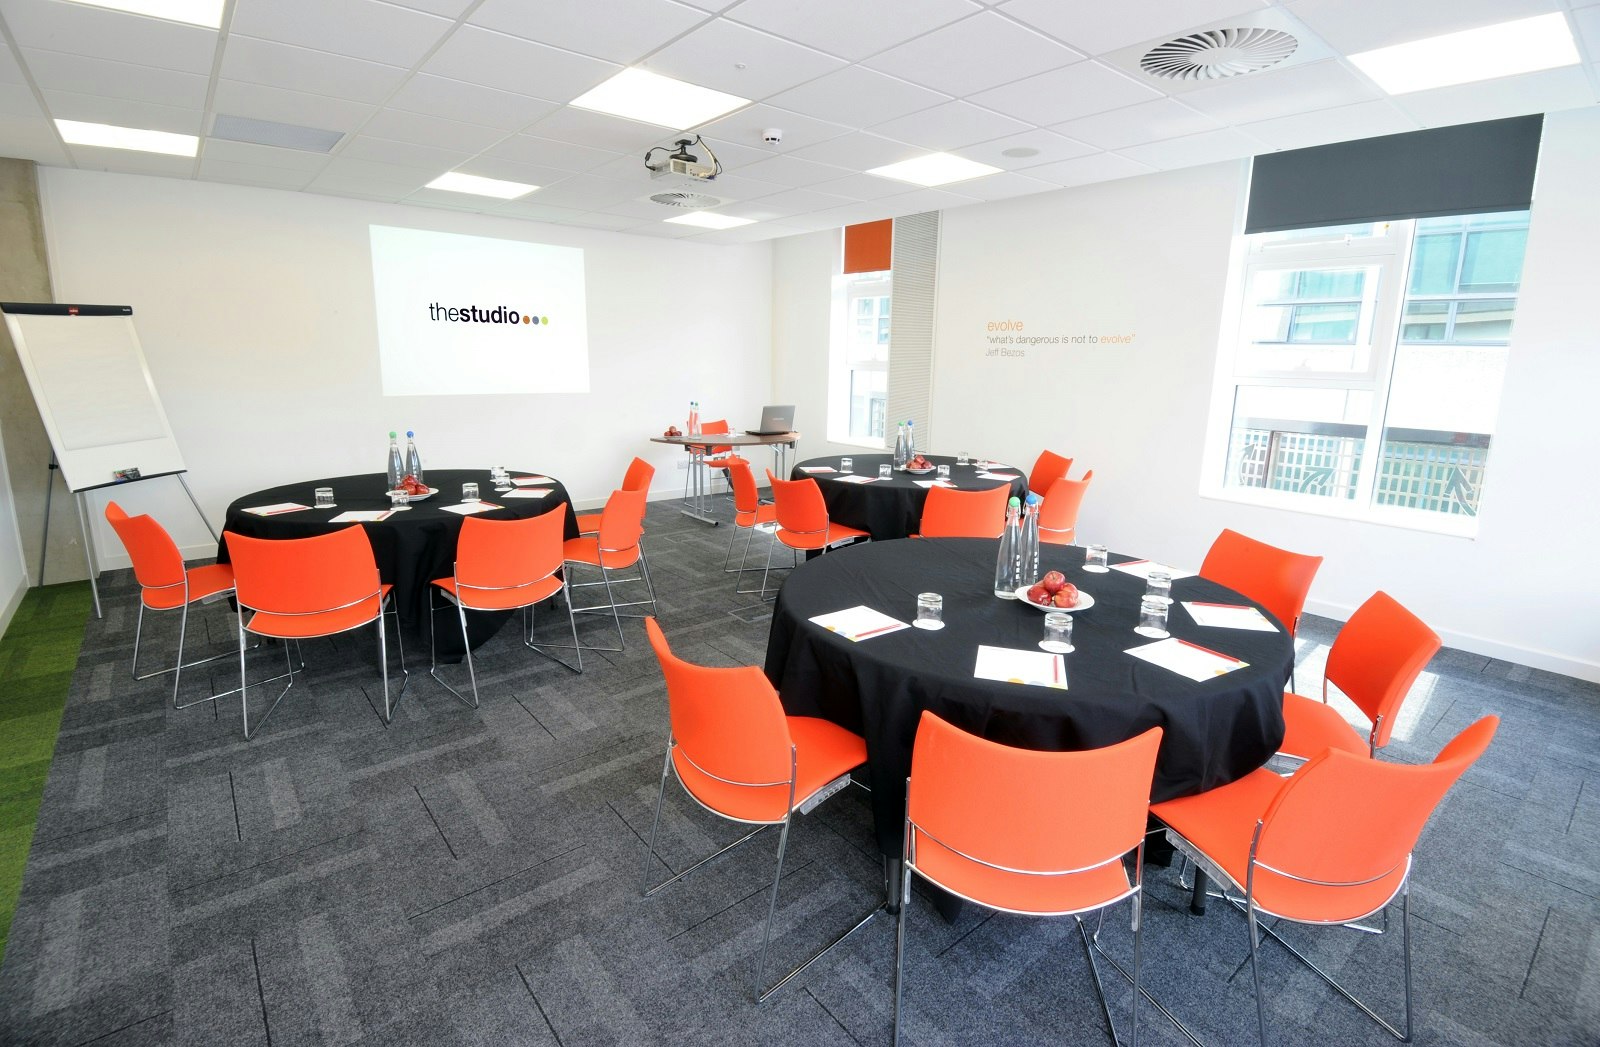 Hotel Function Rooms Venues in Manchester - thestudio Manchester